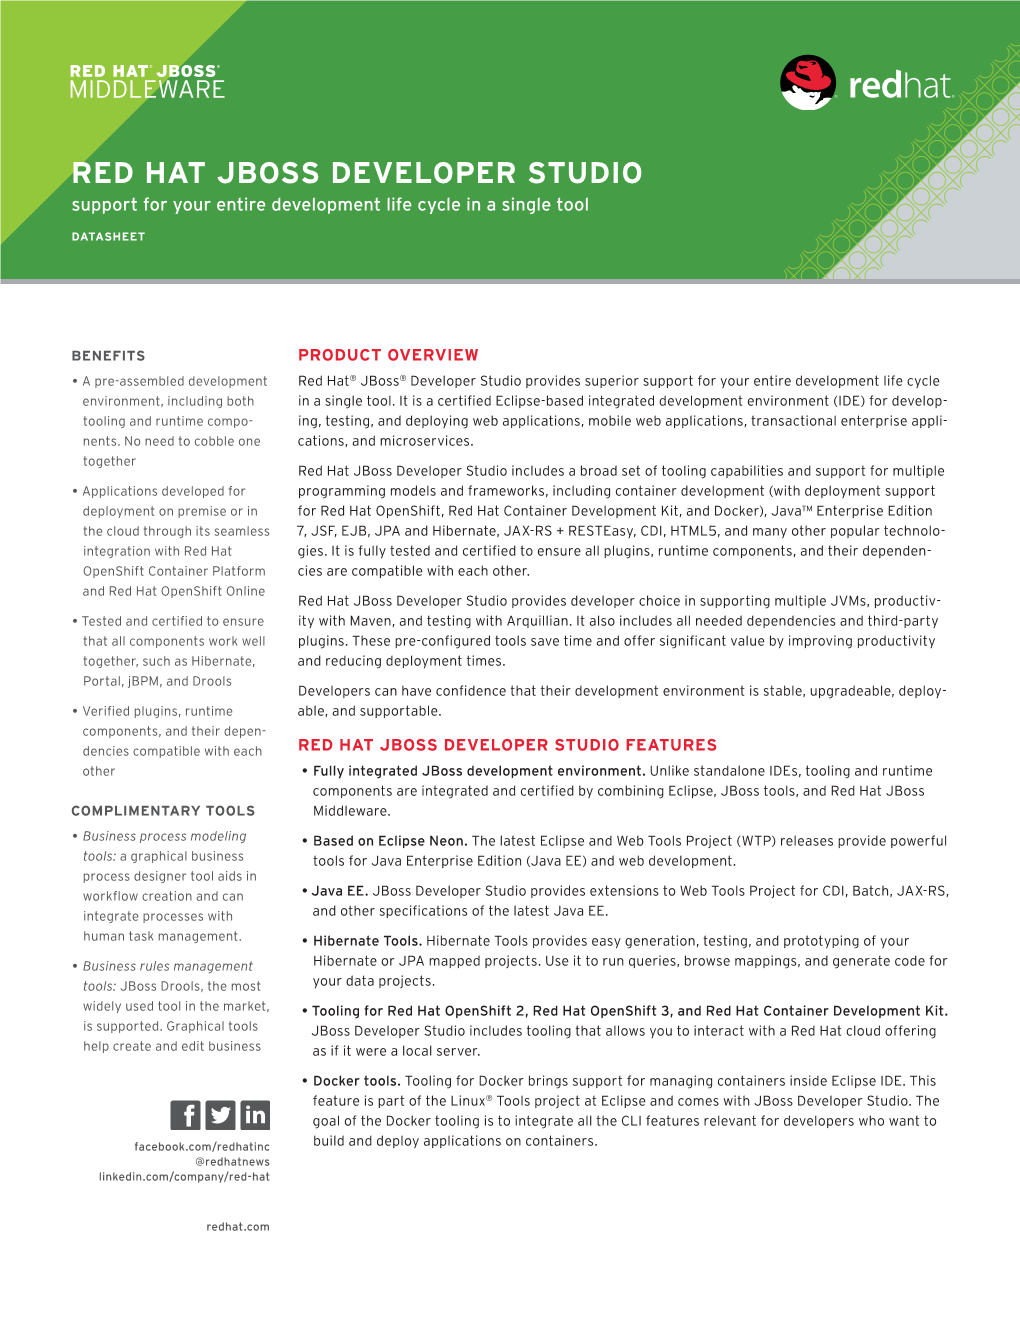 RED HAT JBOSS DEVELOPER STUDIO Support for Your Entire Development Life Cycle in a Single Tool